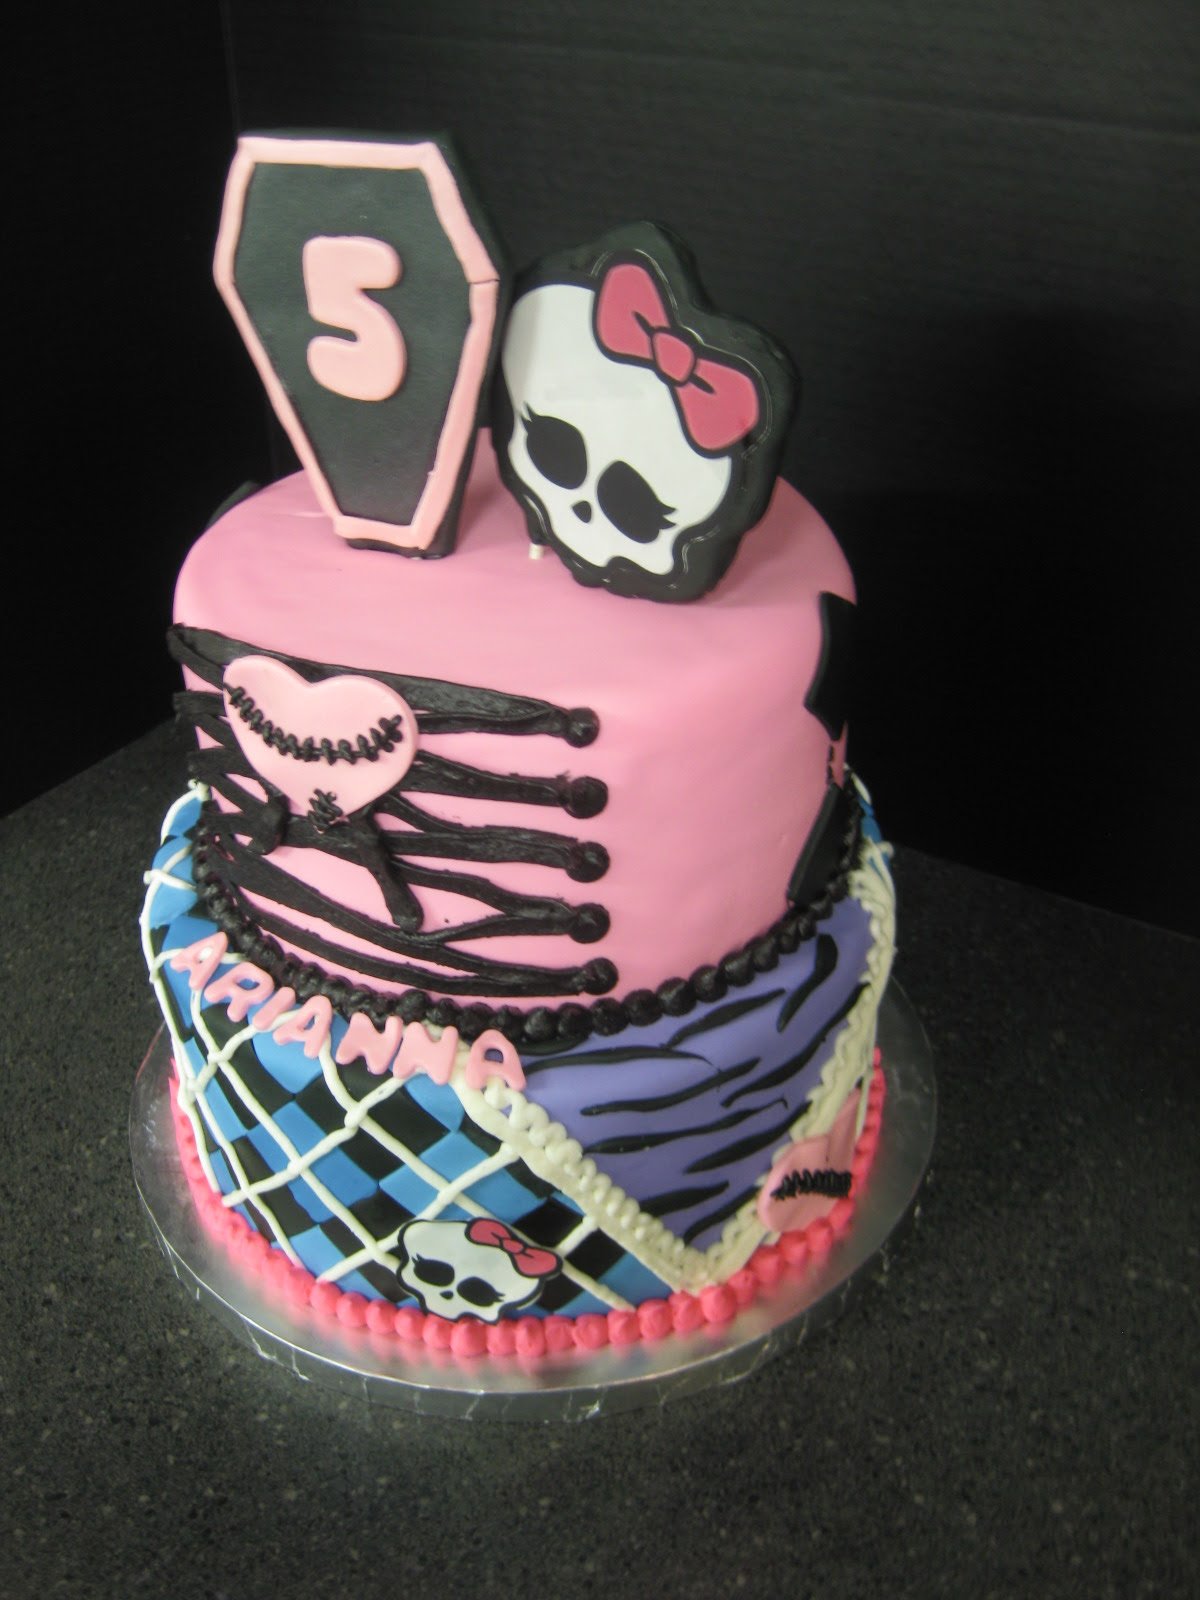 Where Can I Get A Monster High Birthday Cake